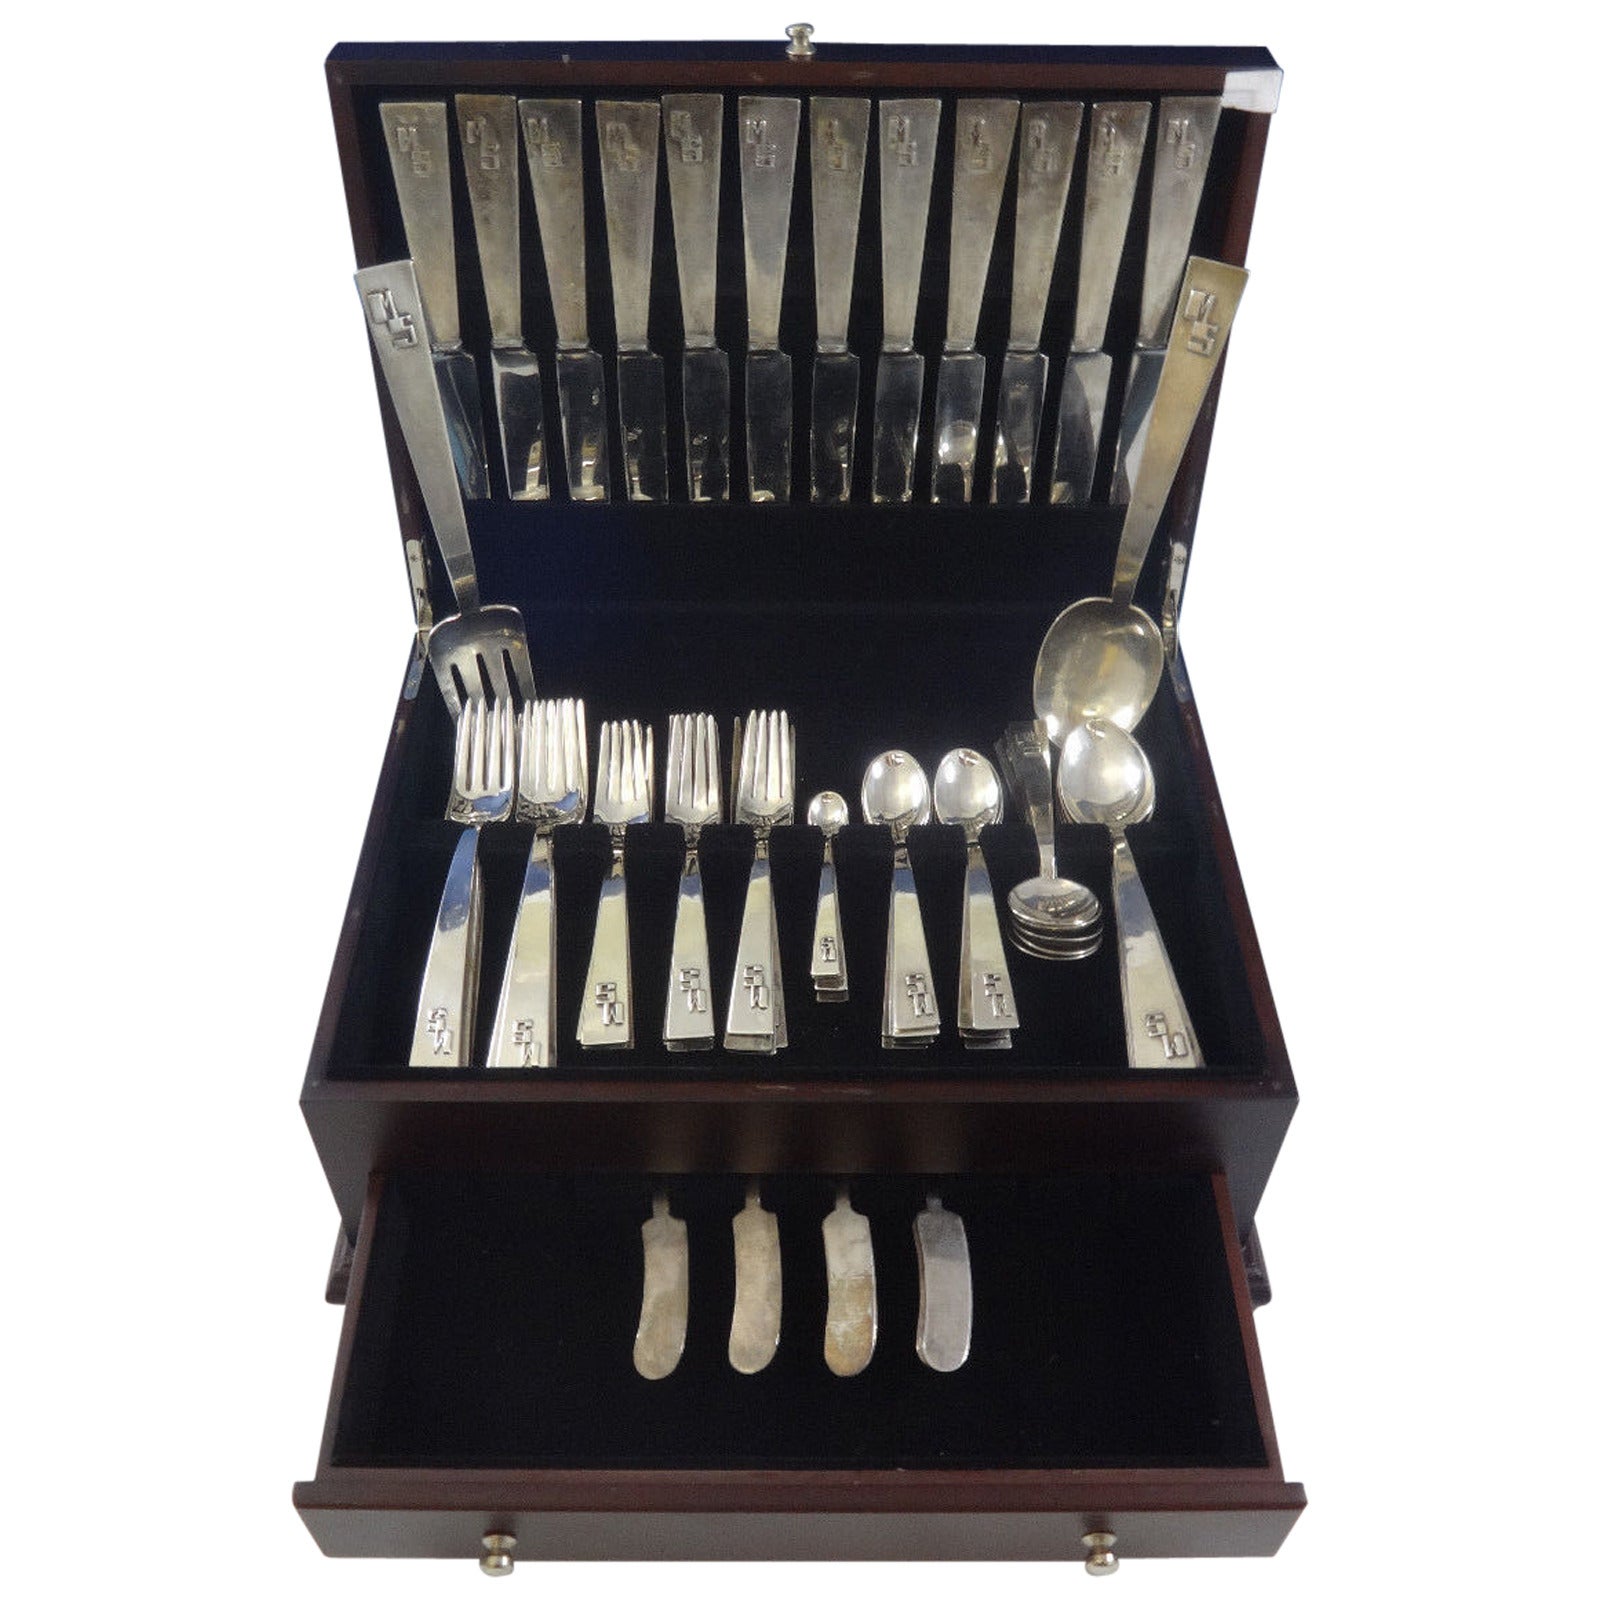 Rare handmade Blok by Maria Regnier sterling silver Arts & Crafts flatware dinner size set, 98 pieces. This set includes:

12 innovative solid handle dinner knives, 9 3/4